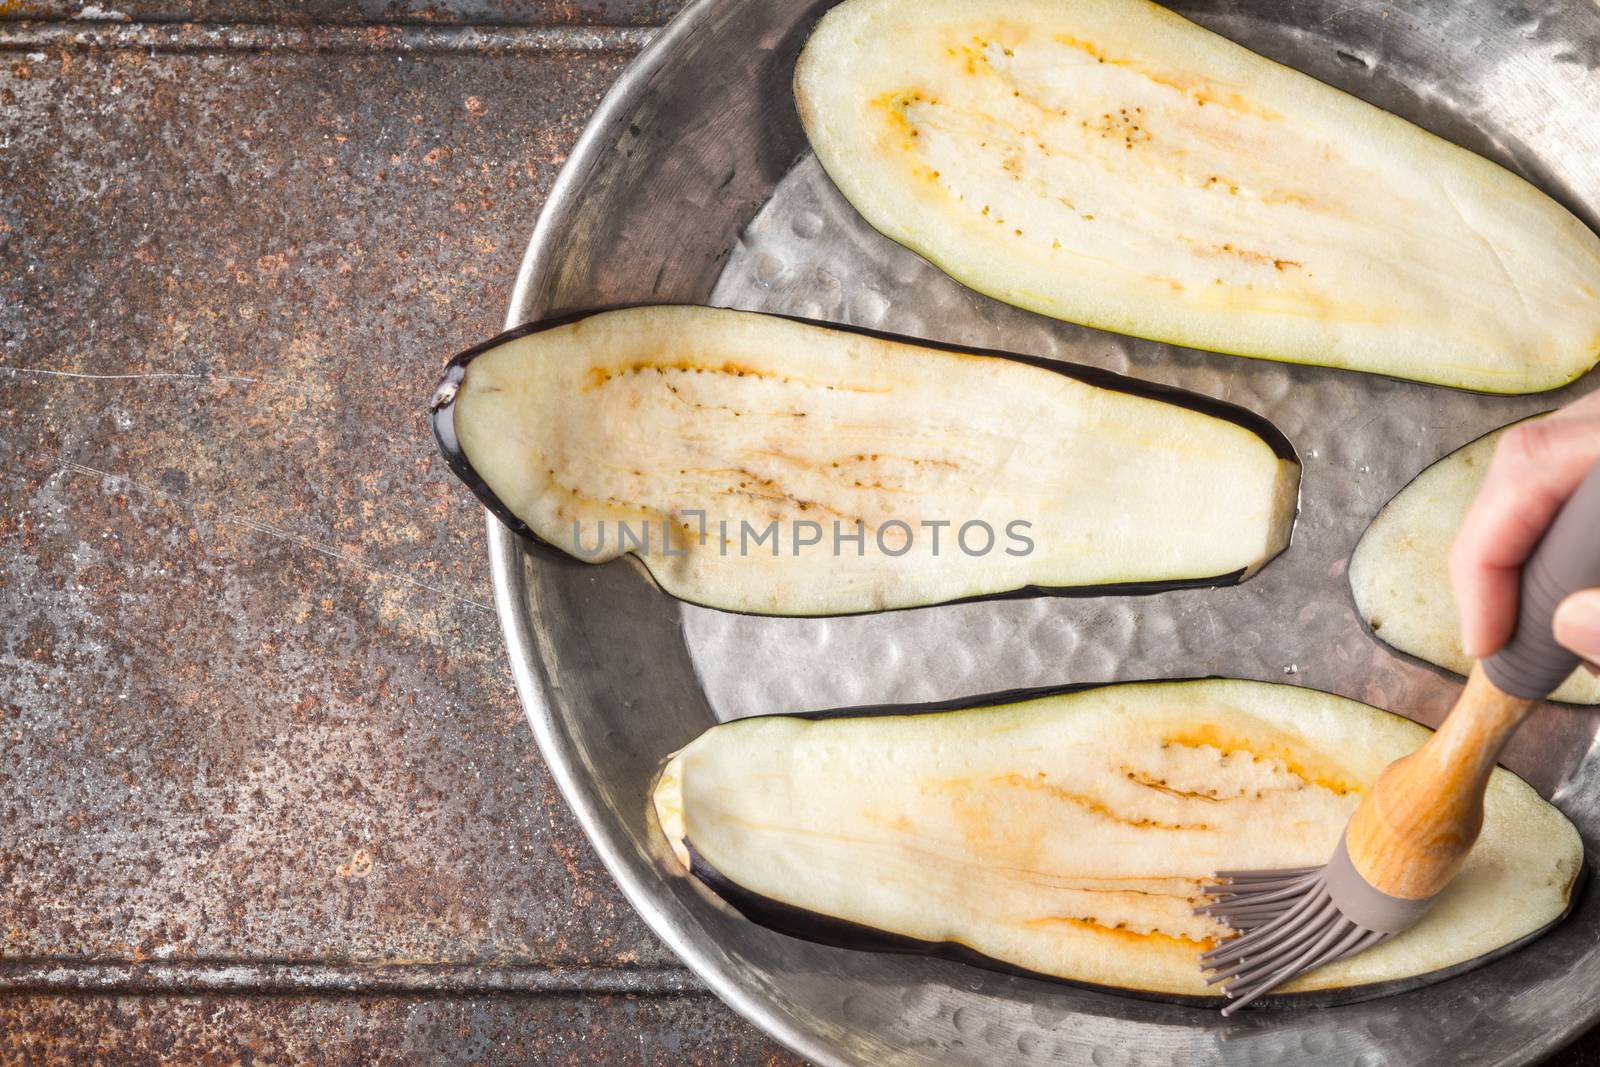 Brush the eggplant slices with olive oil top view by Deniskarpenkov